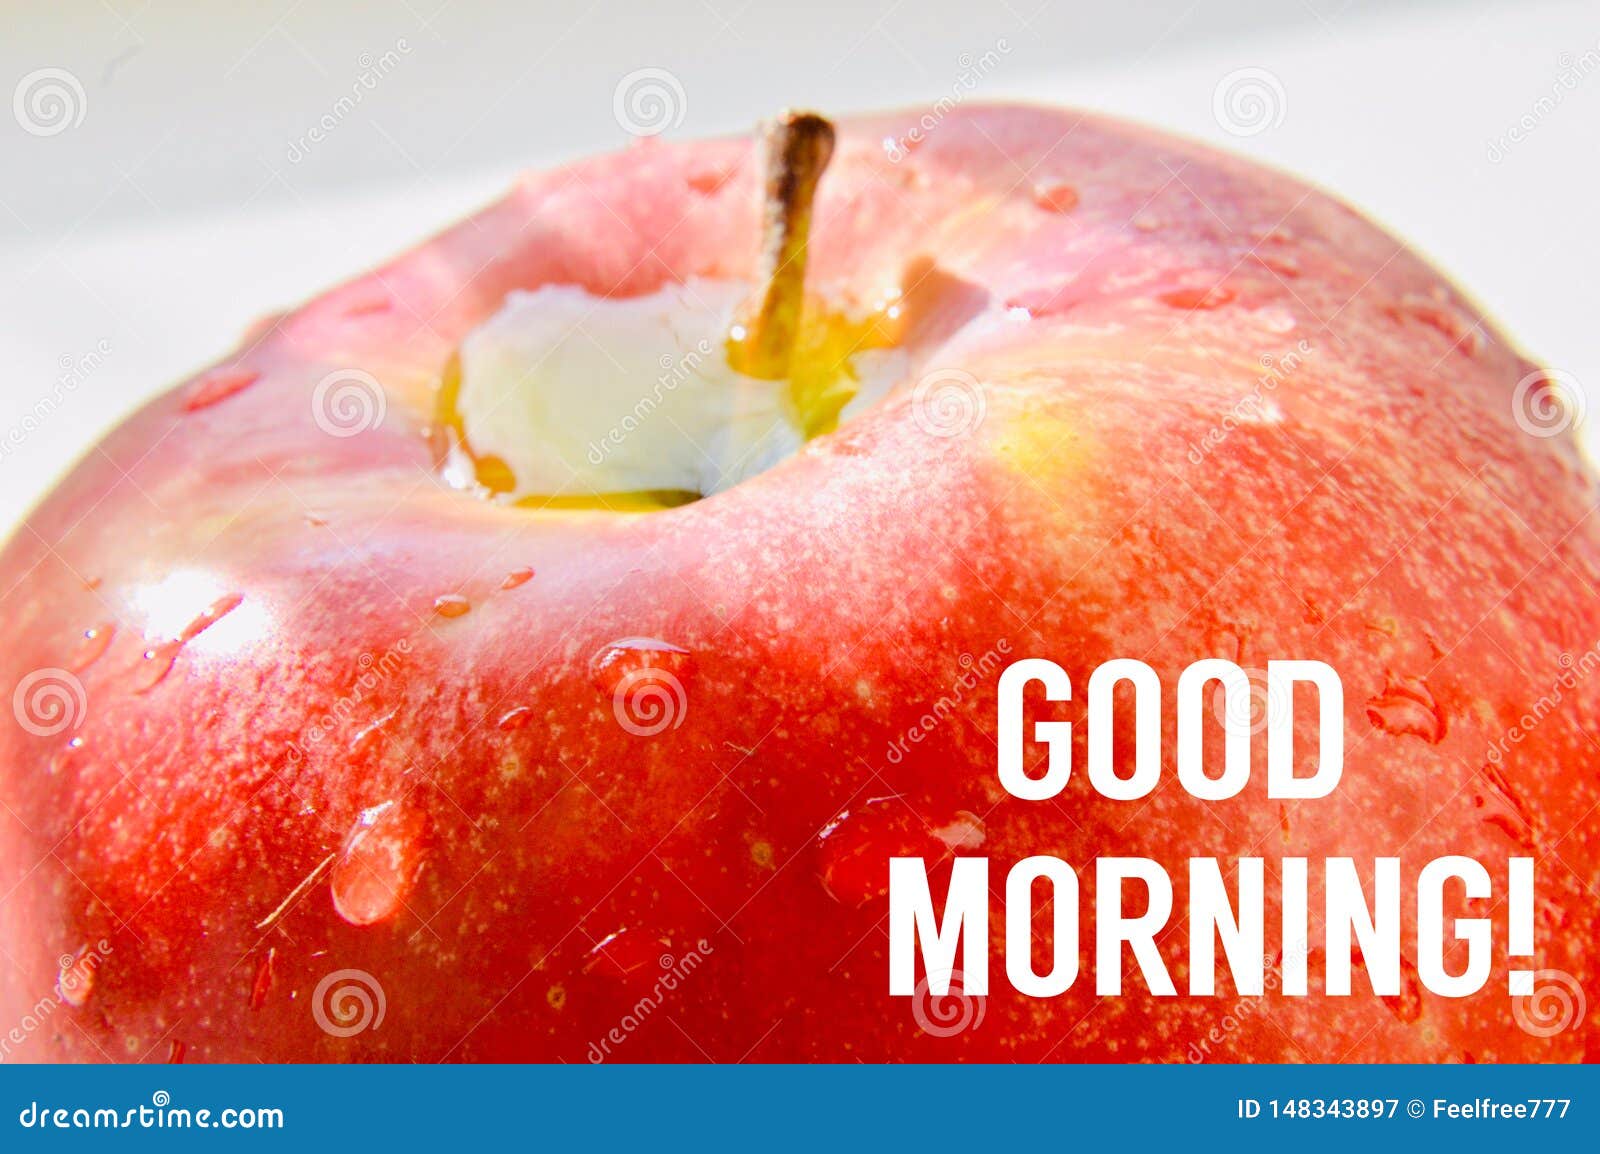 Good Morning Quote Super Quality Abstract Business Picture Stock ...